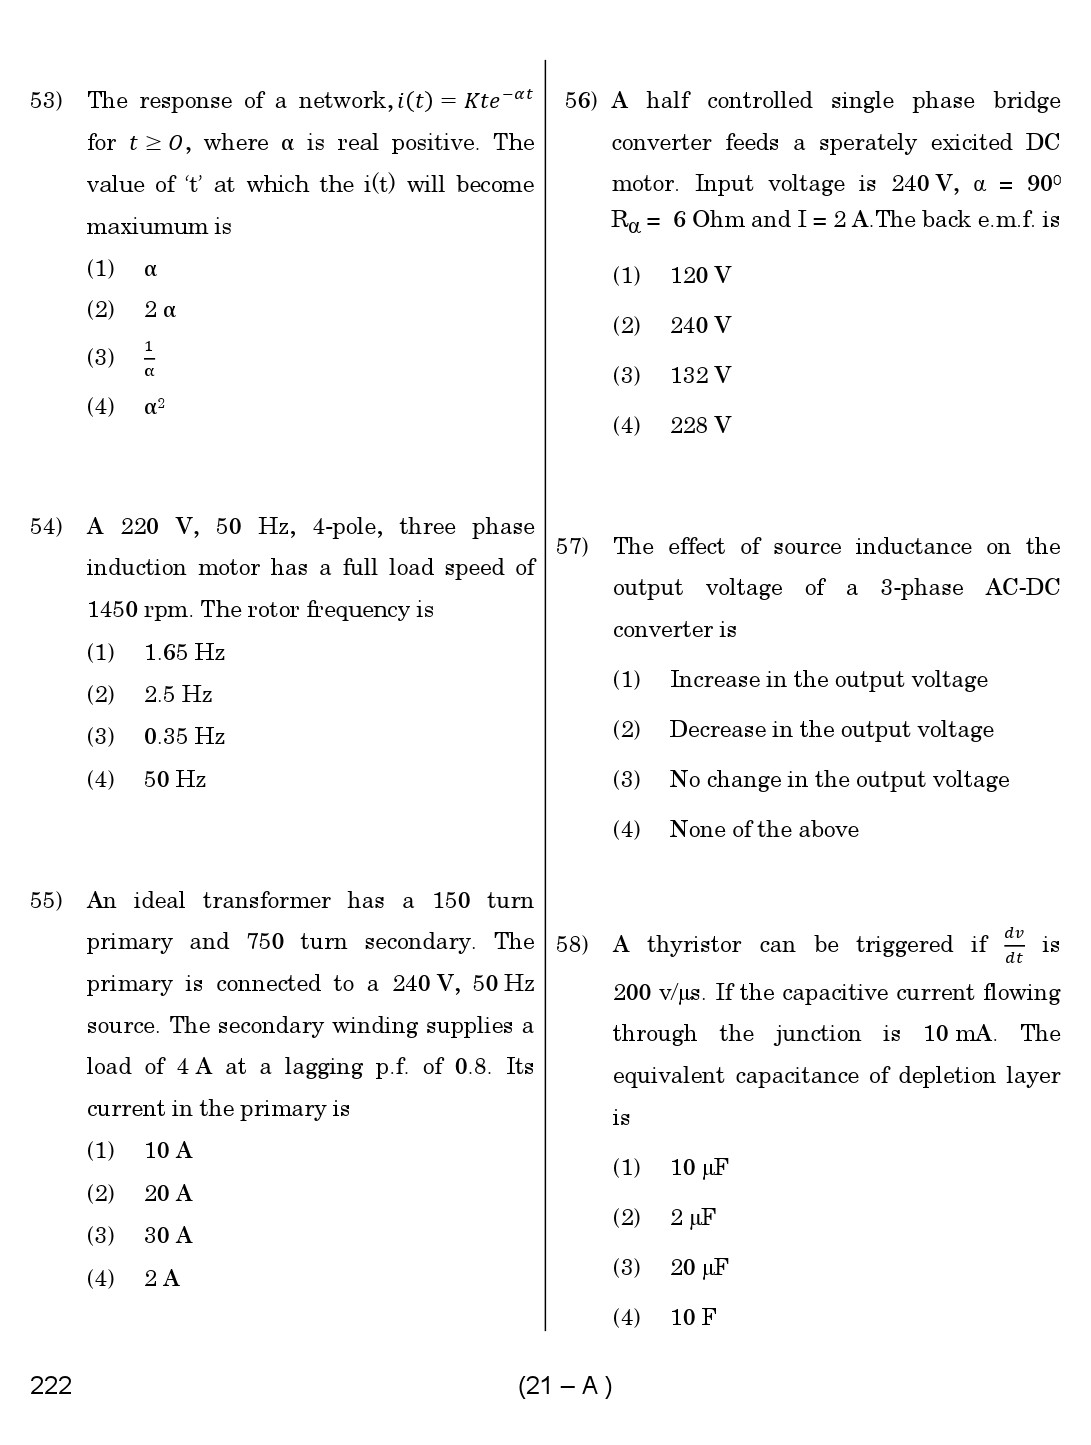 Karnataka PSC Assistant Engineer Electrical Exam Sample Question Paper 21